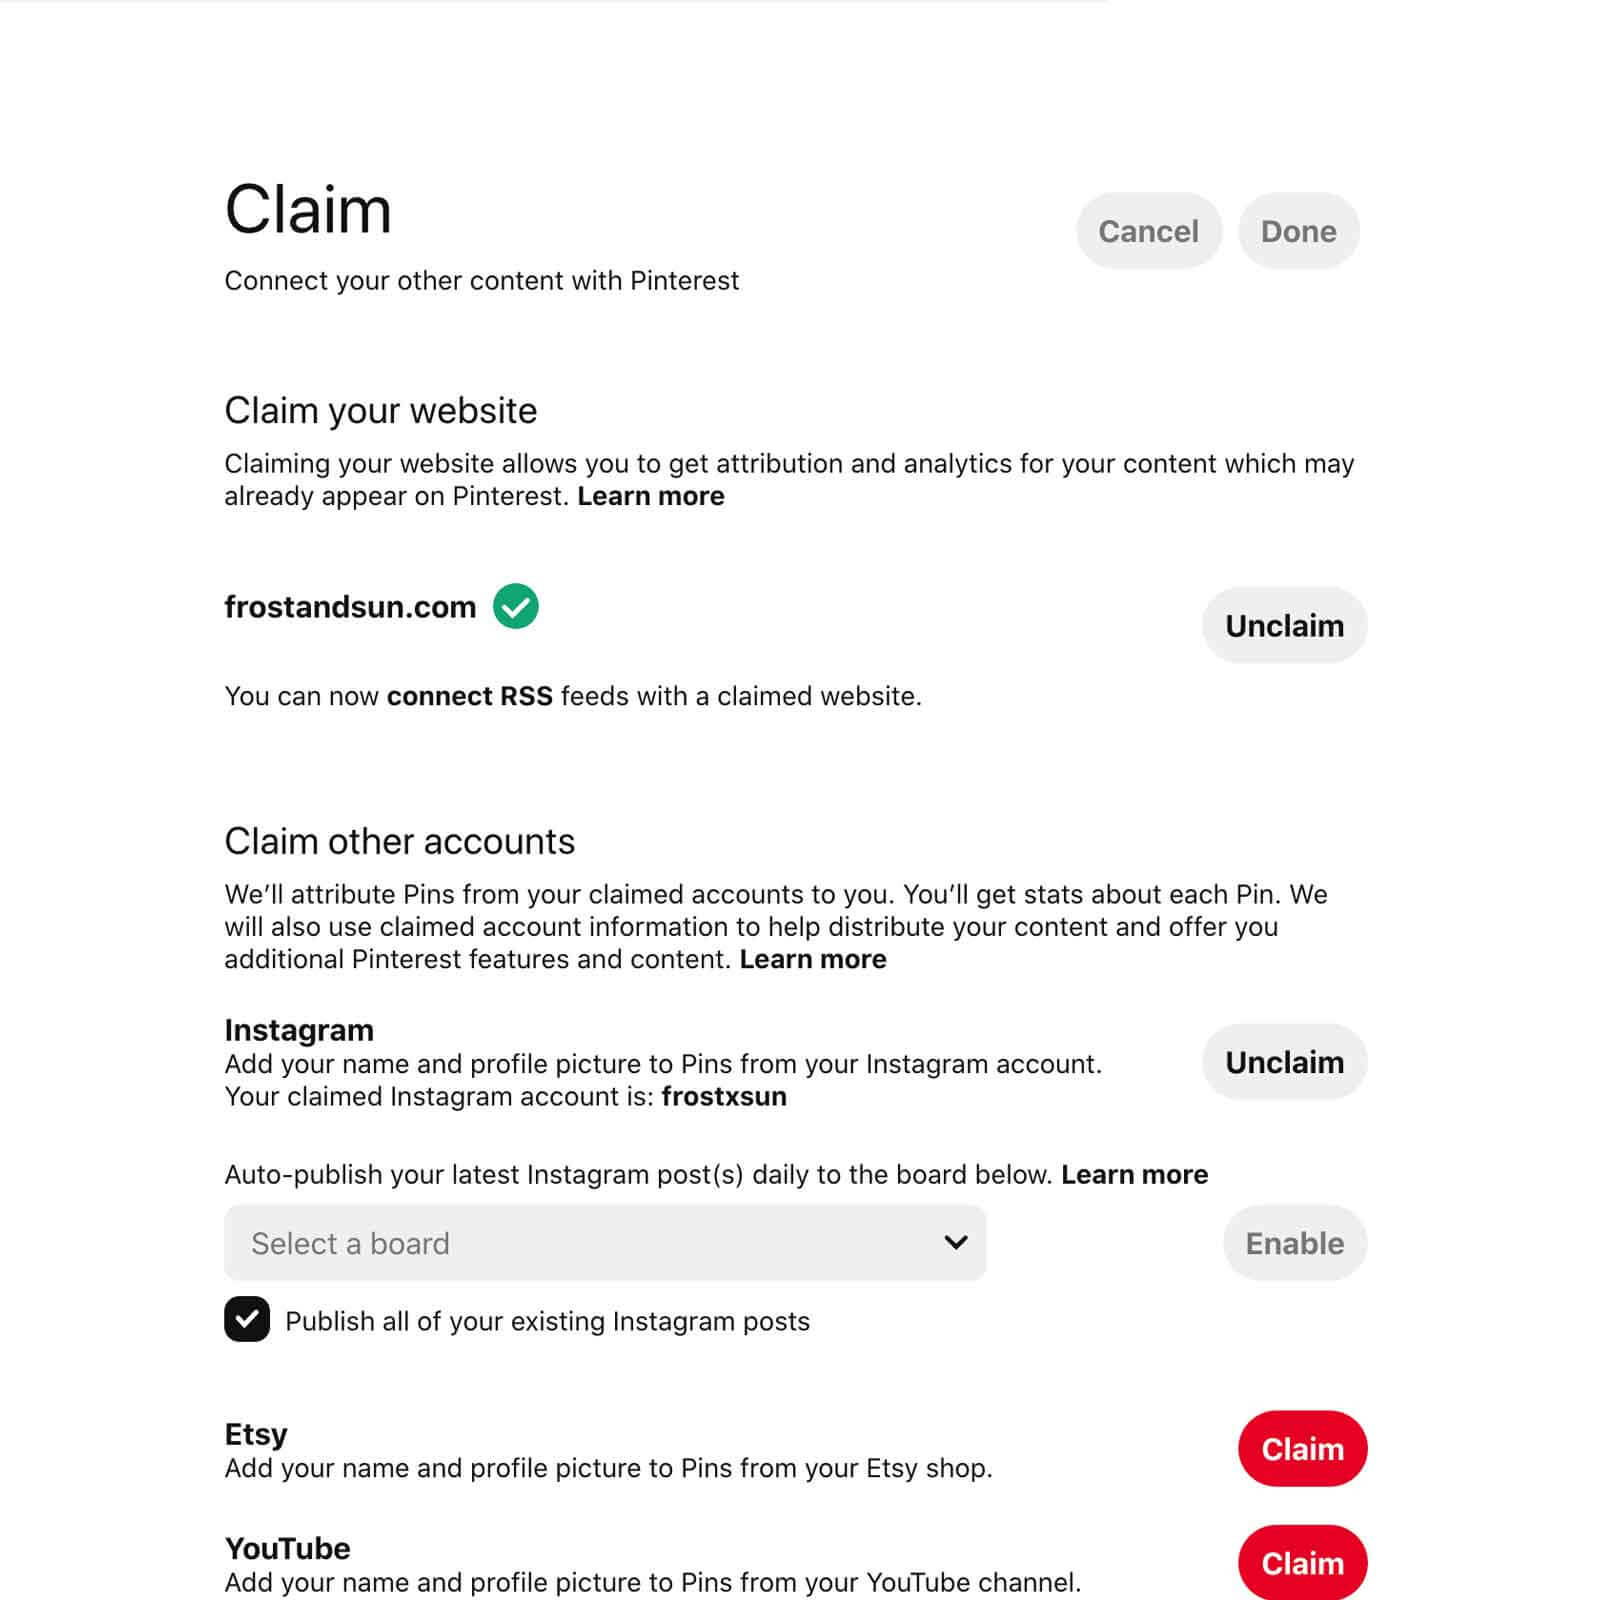 Screenshot of the Claim Website page on a Pinterest business account.